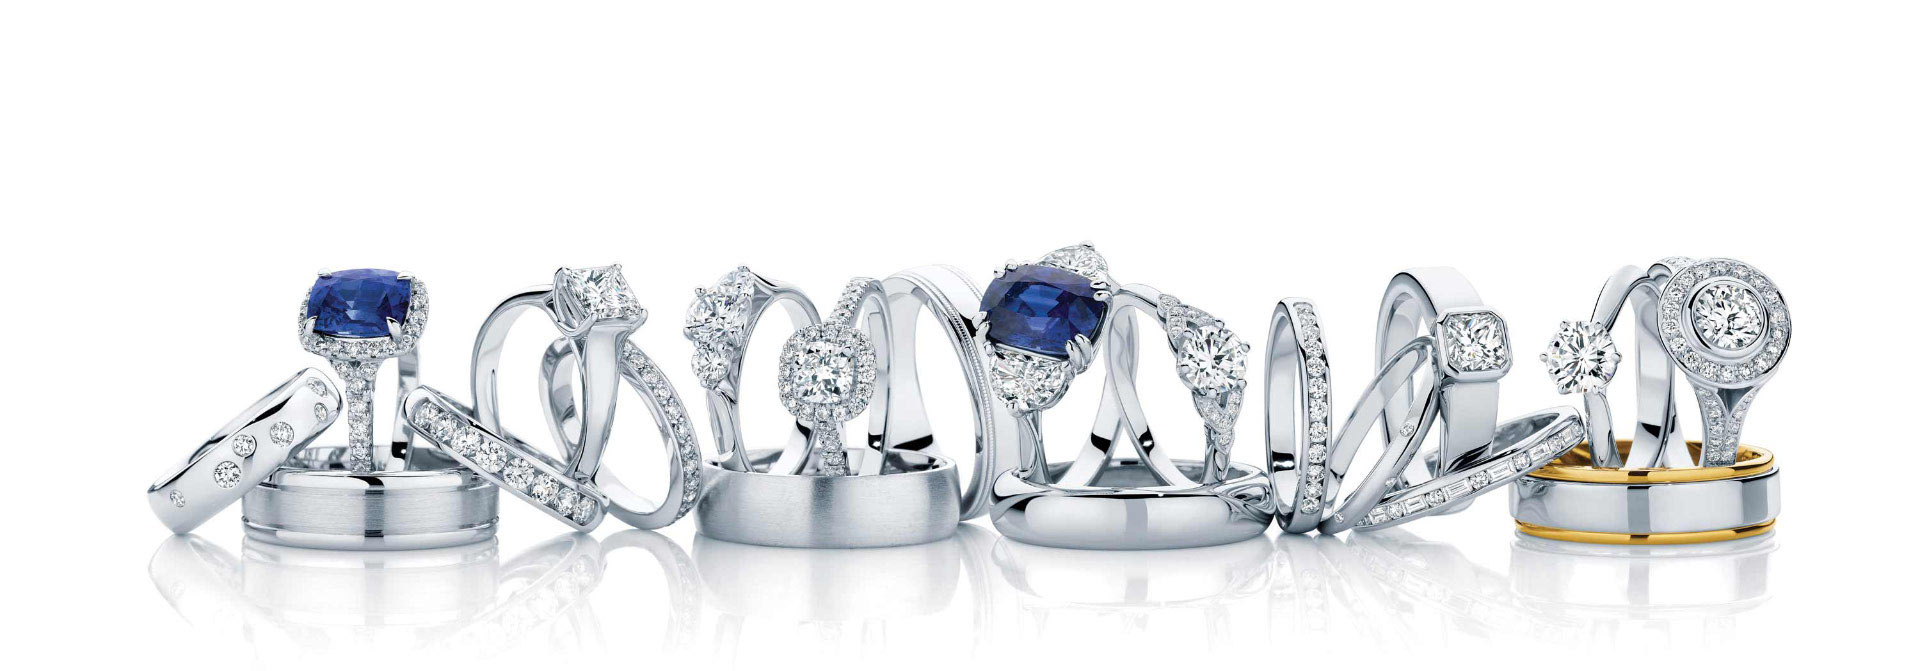 Here Are 6 Alternative Gem Rings for Your Fiance